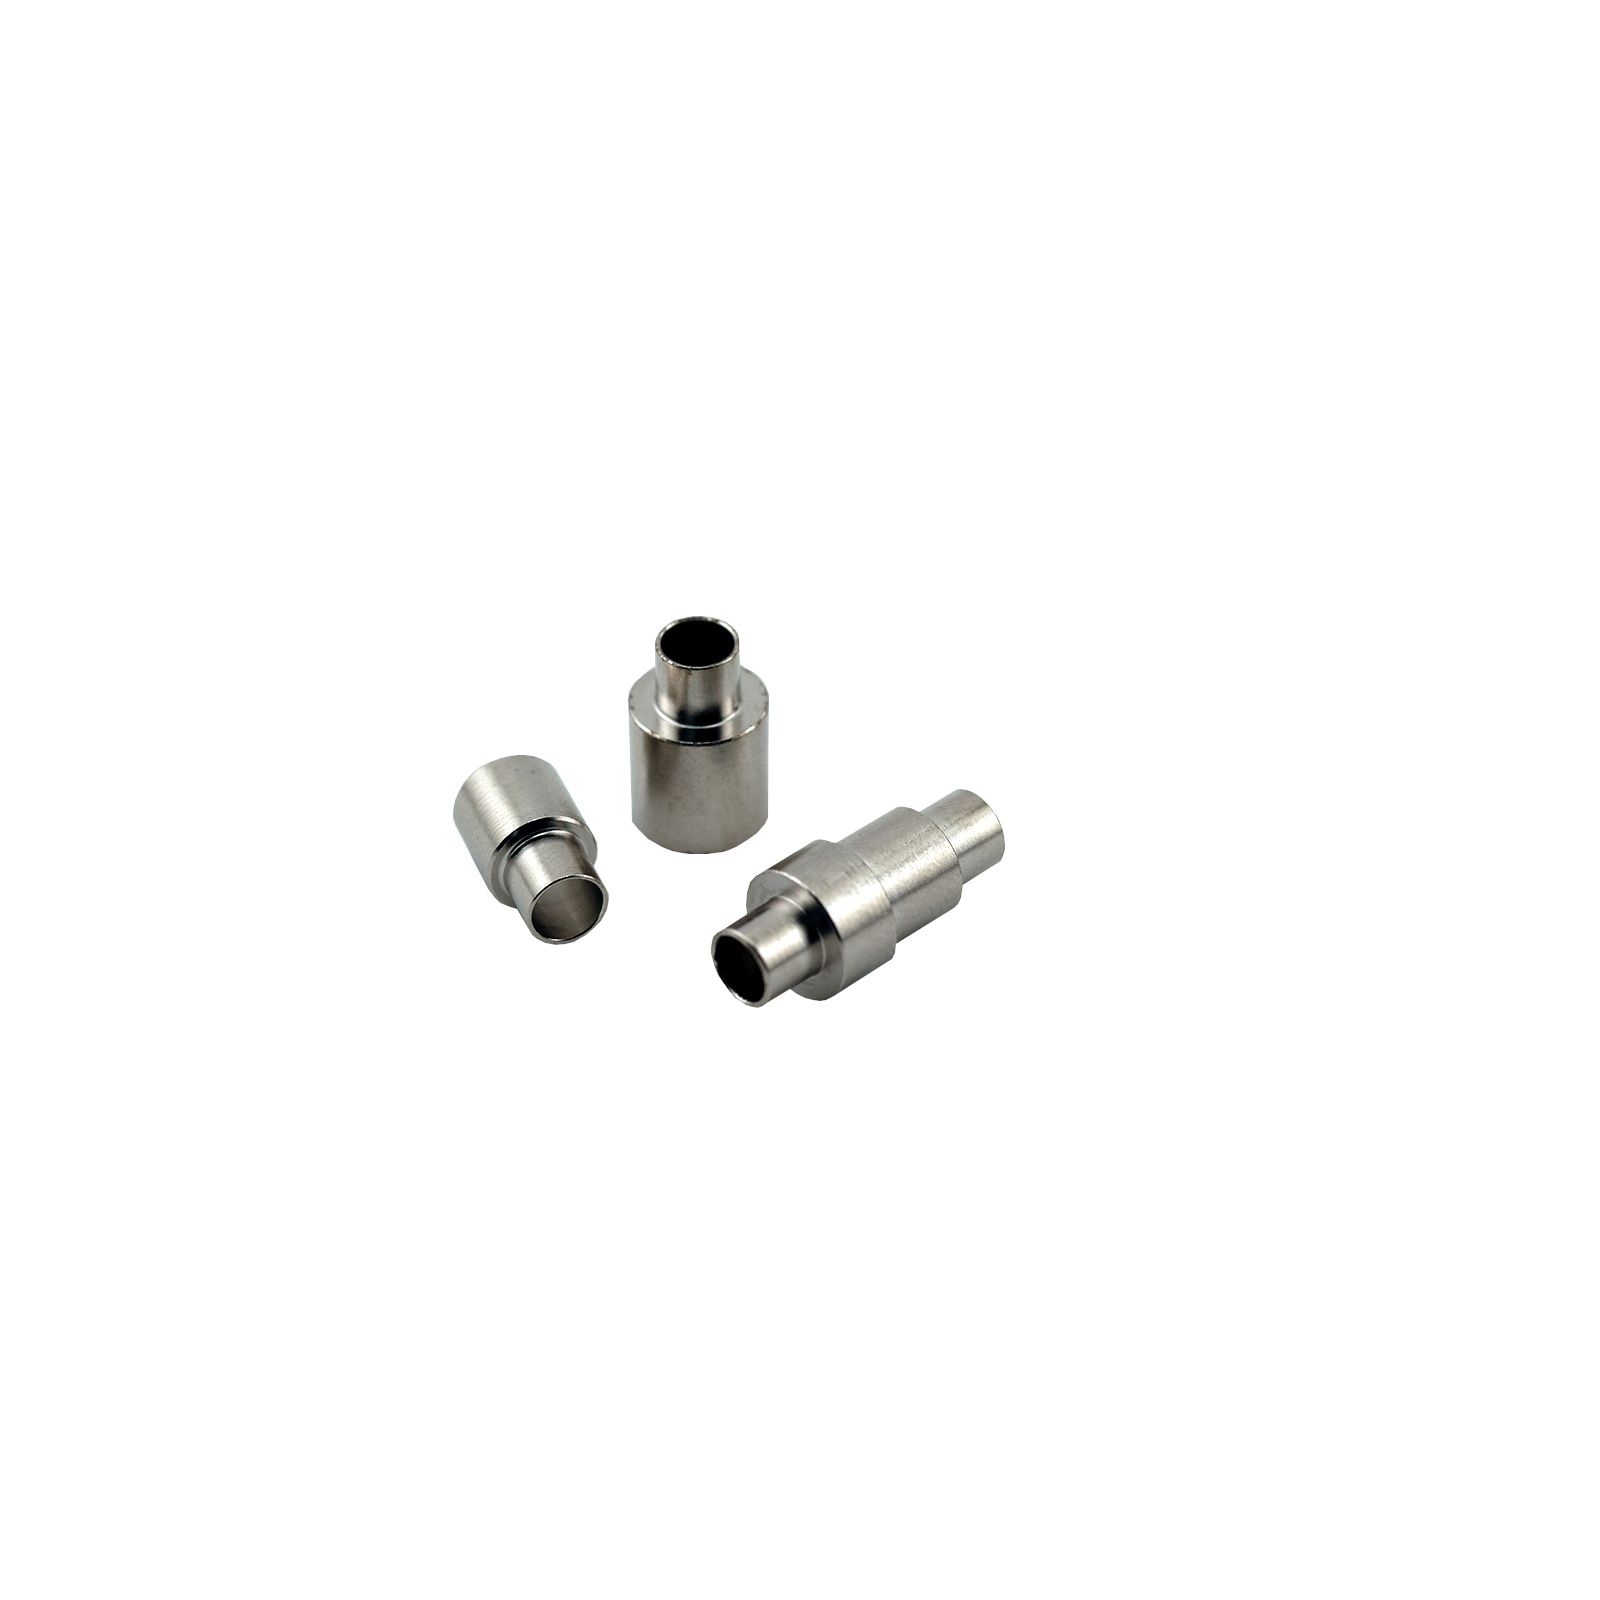 2pc Bushings for Chalk Holder Kits at Penn State Industries